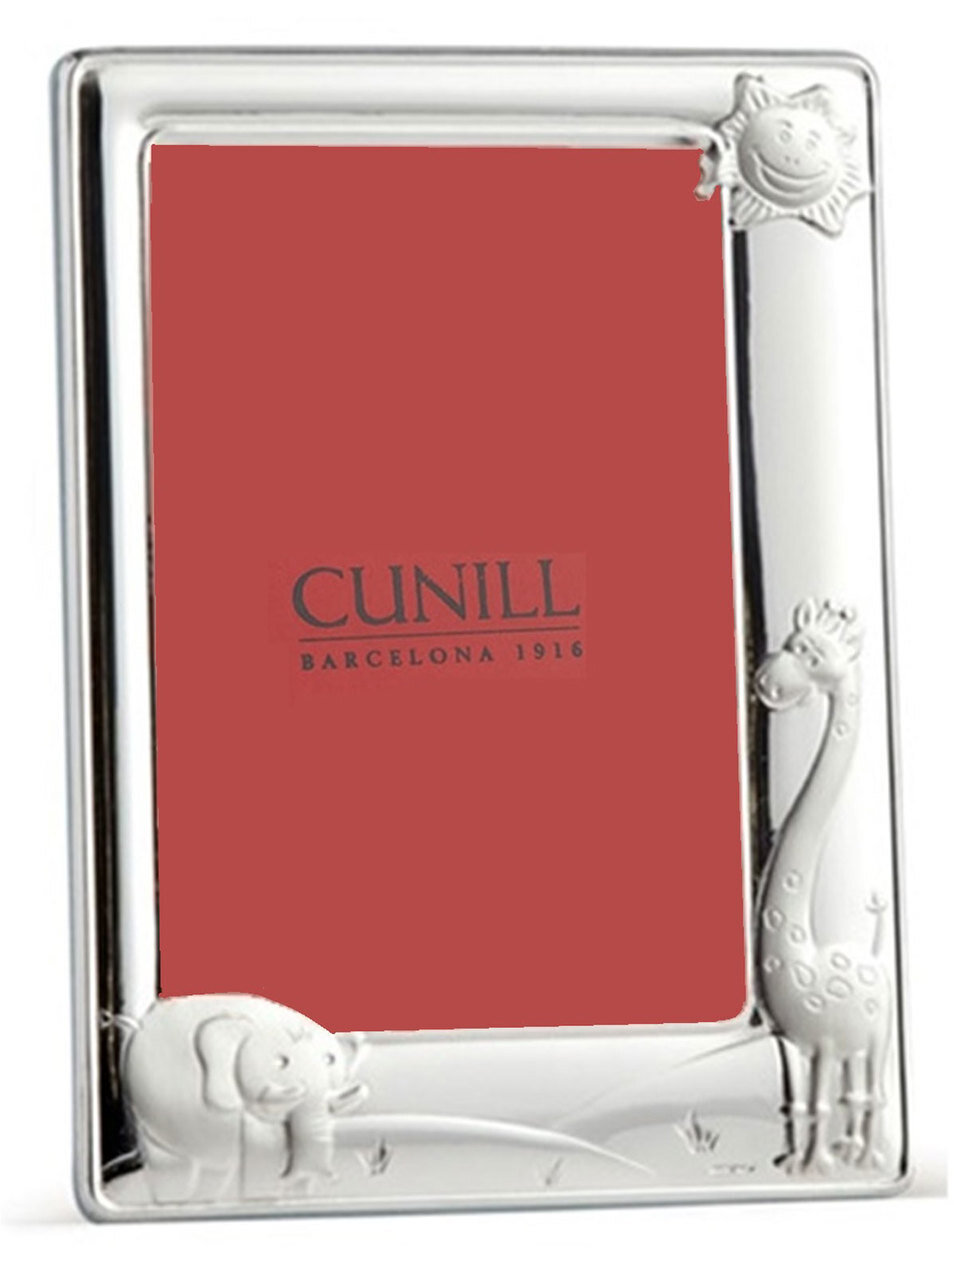 Cunill Sunny Zoo 4 x 6 Inch Picture Frame pink back - Sterling Silver